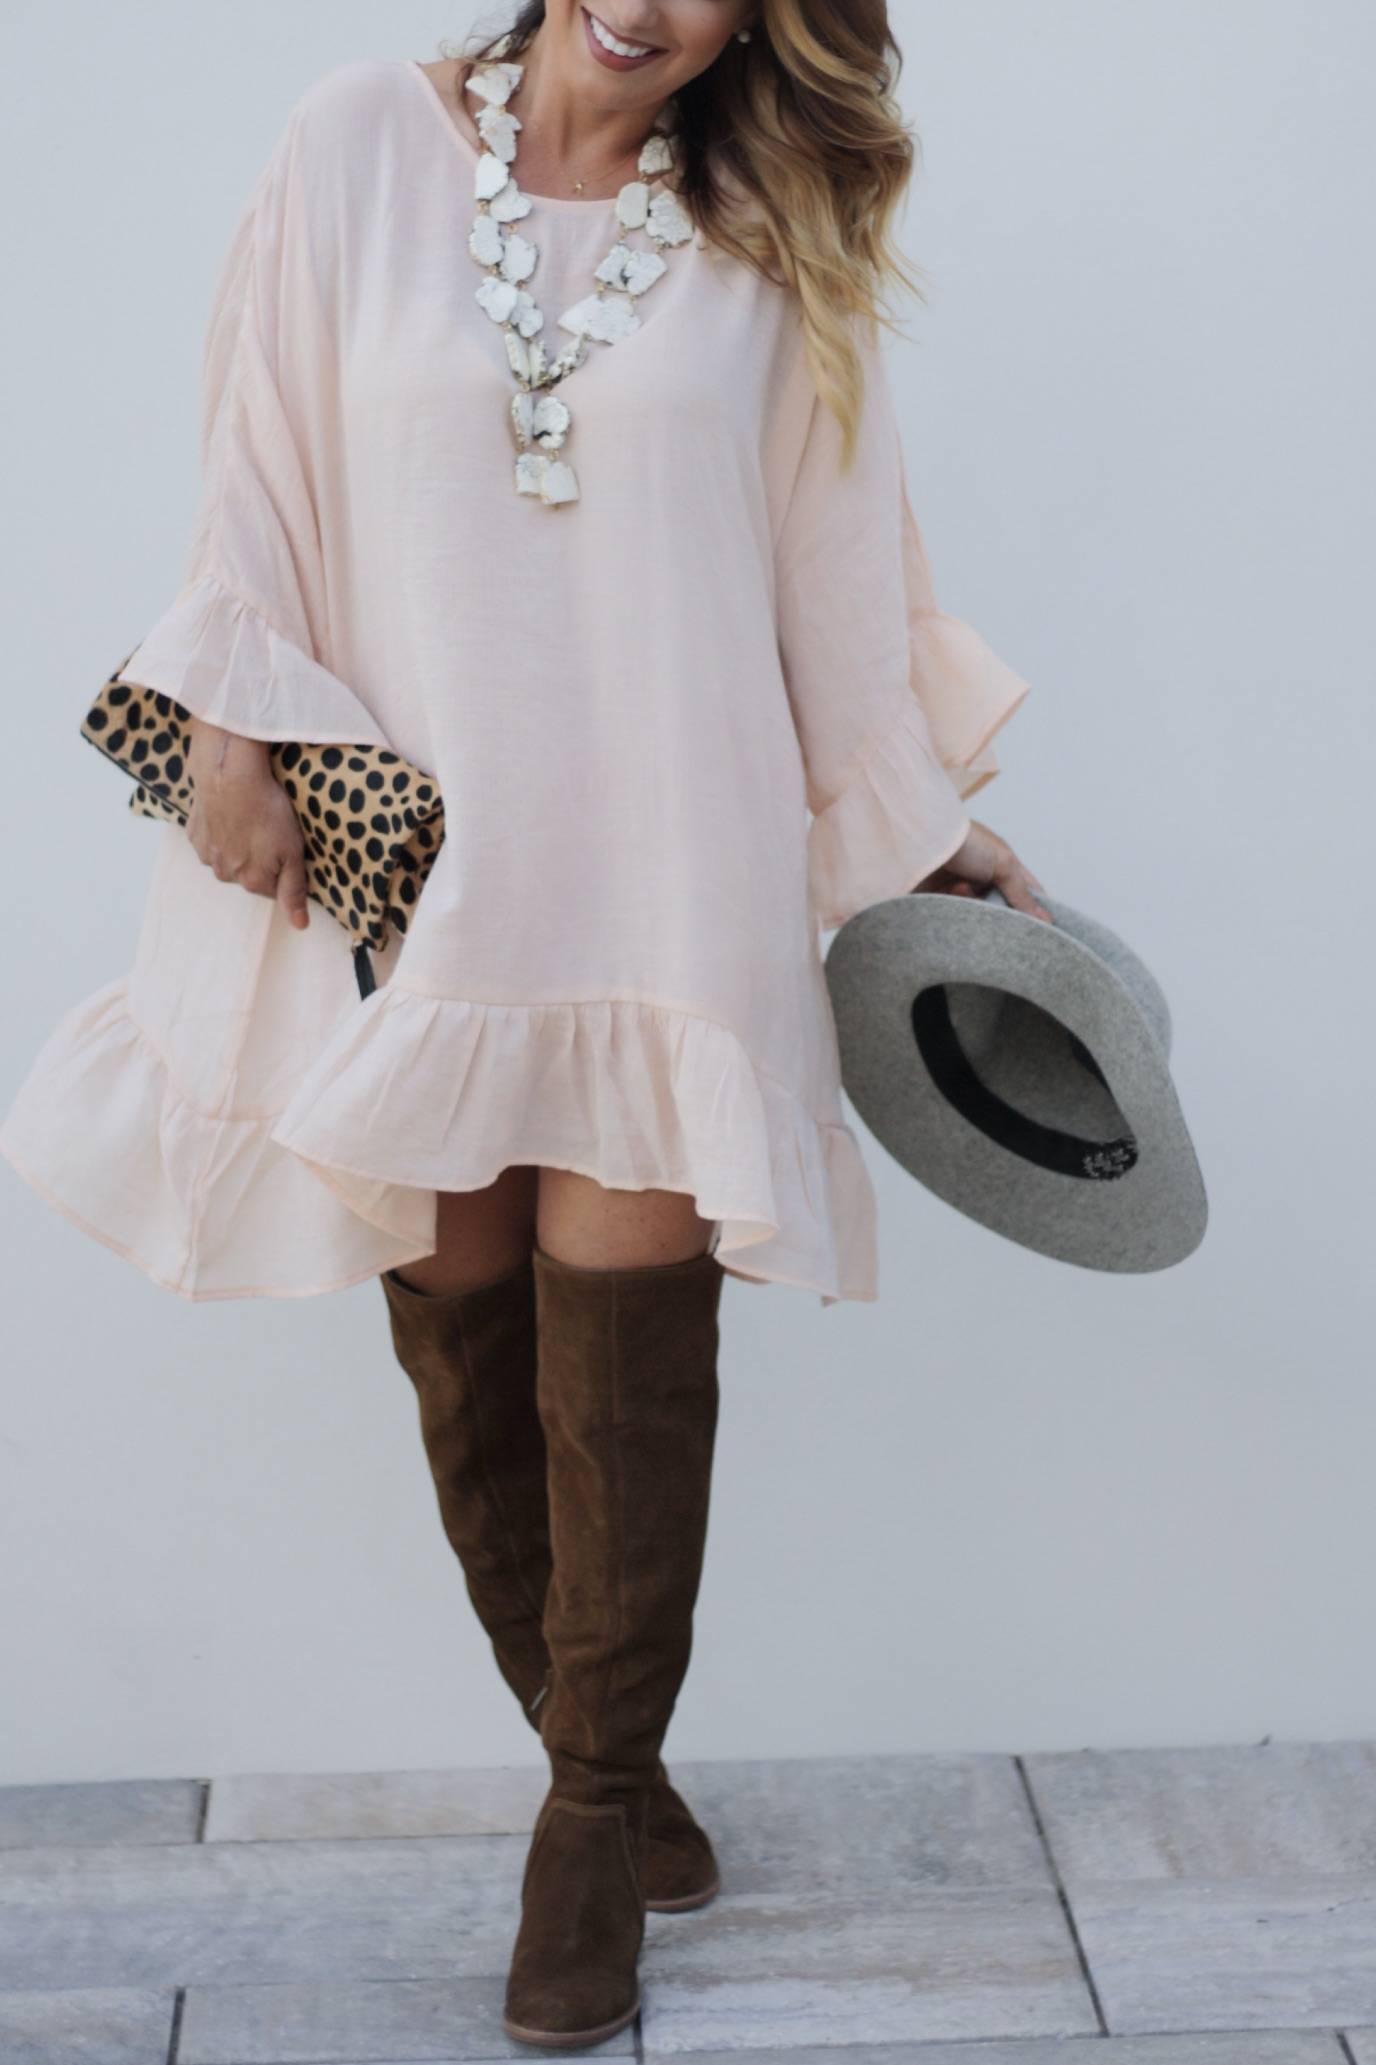 Ruffles and over the knee boots - Dashing Darlin'